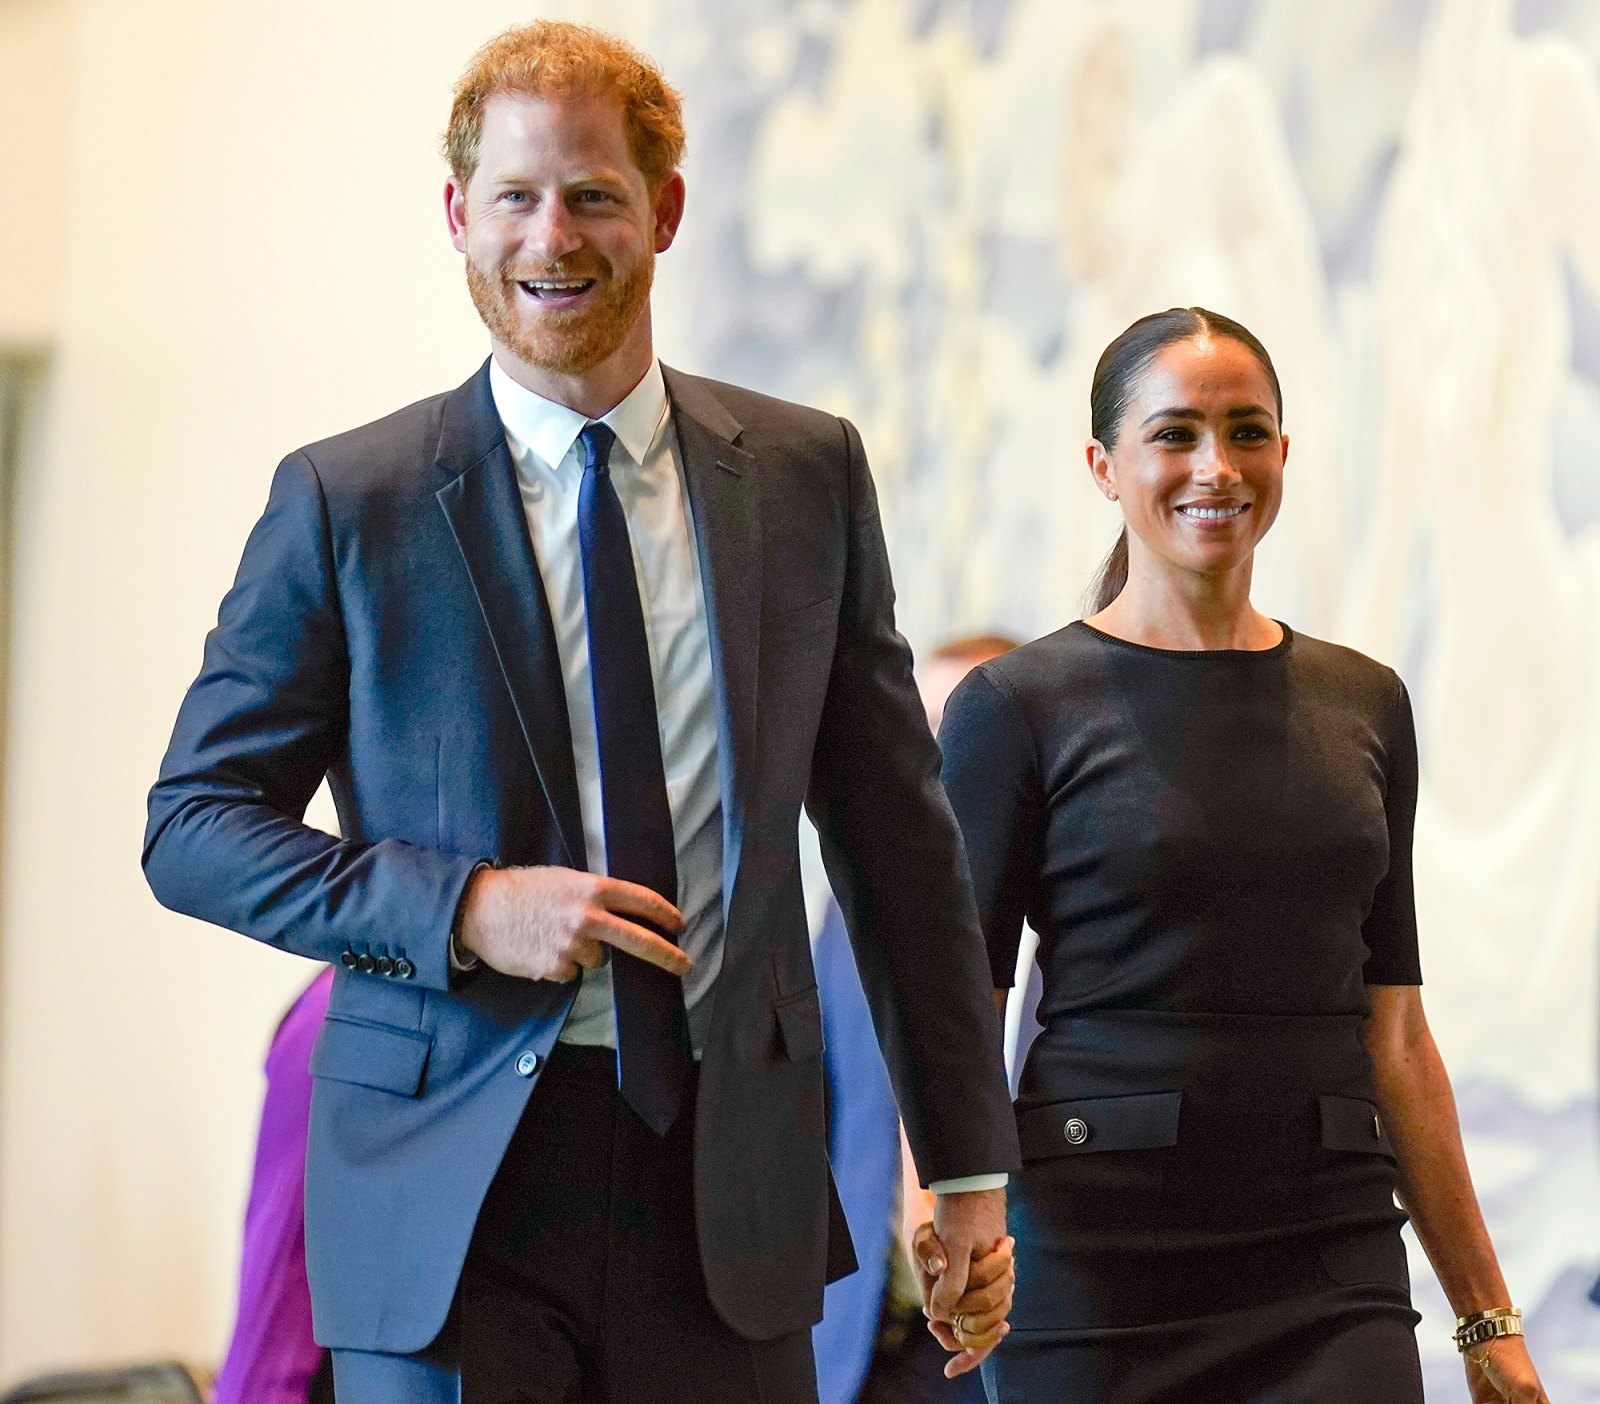 Every Rare Glimpse of Archie and Lili in Harry and Meghan Documentary